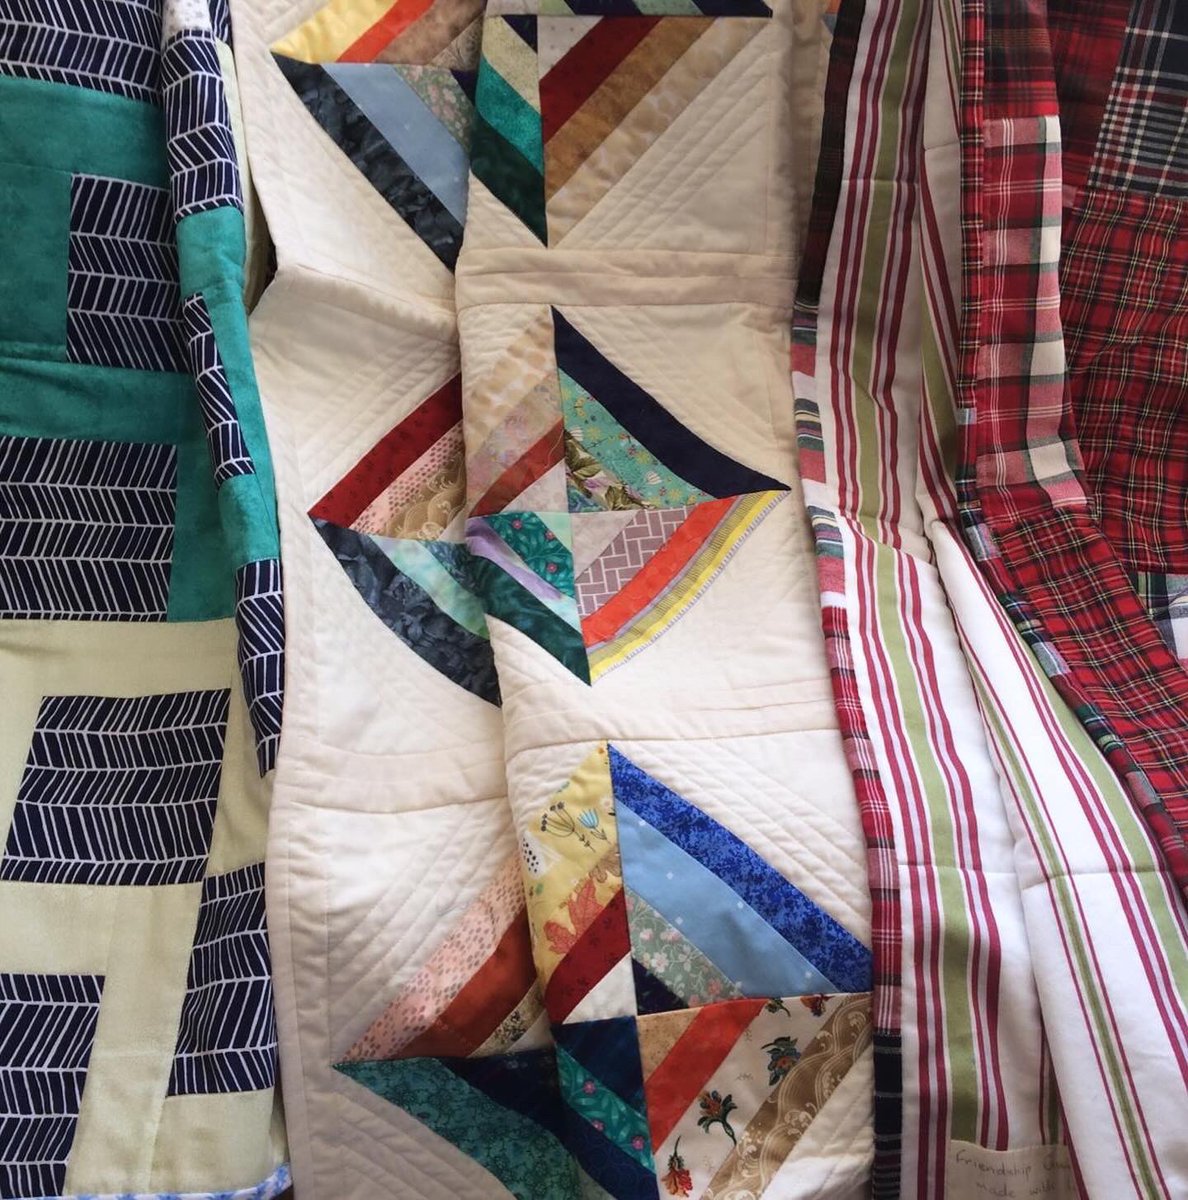 Around two years ago Suzanne contacted us to offer friendship quilts that she and her quilting connections had made for refugees. To date they have gifted over 500 exquisitely made quilts to refugees across the Uk inc many Sanctuary beneficiaries. #friendshipquilts